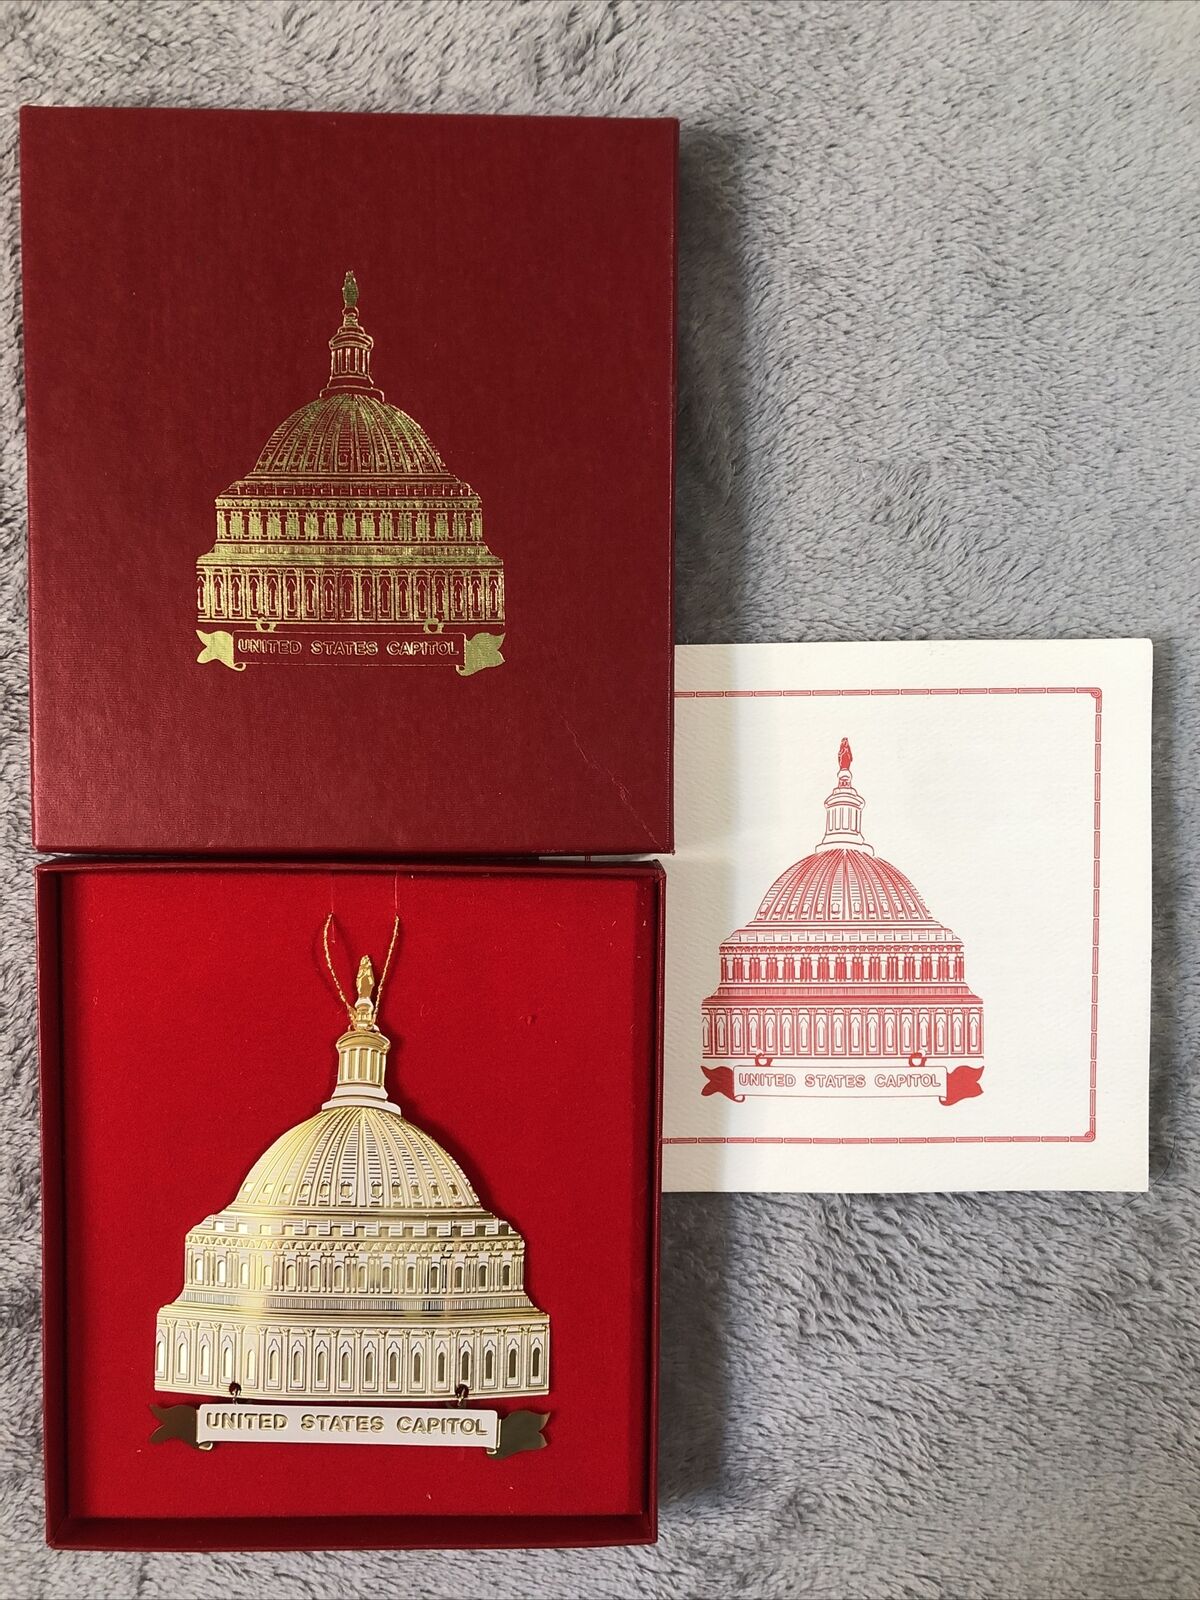 RARE 1989 United States Capitol Christmas Ornament 24kt Gold 3rd In Series Dome